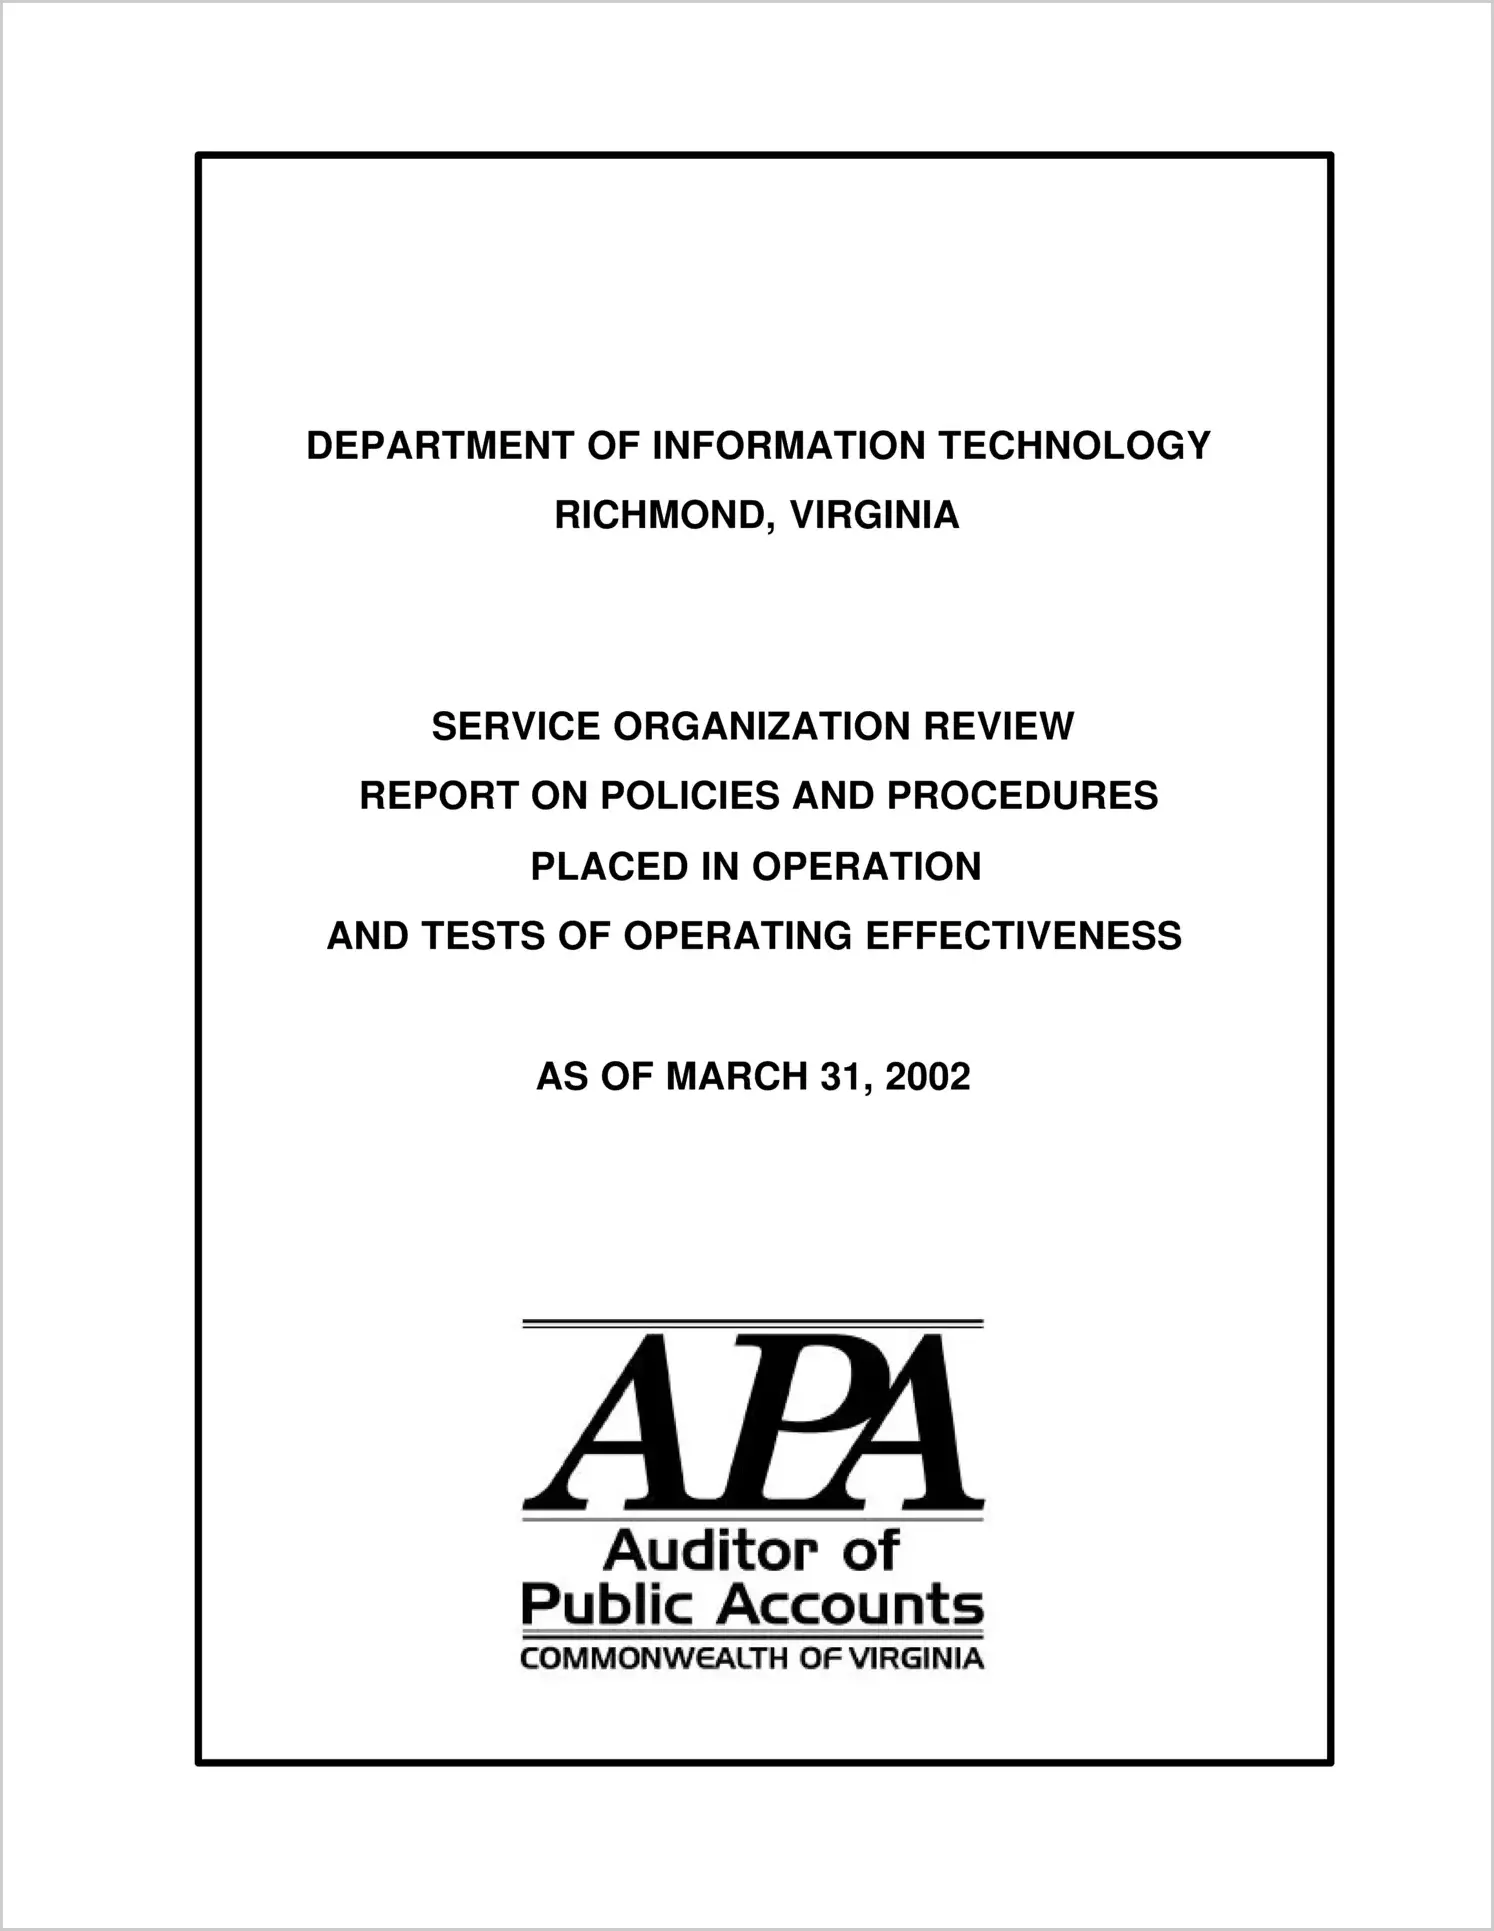 Department of Information Technology, Service Organization Review, Report on Policies and Procedures Placed in Operation and Tests of Operating Effectiveness as of March 31, 2002